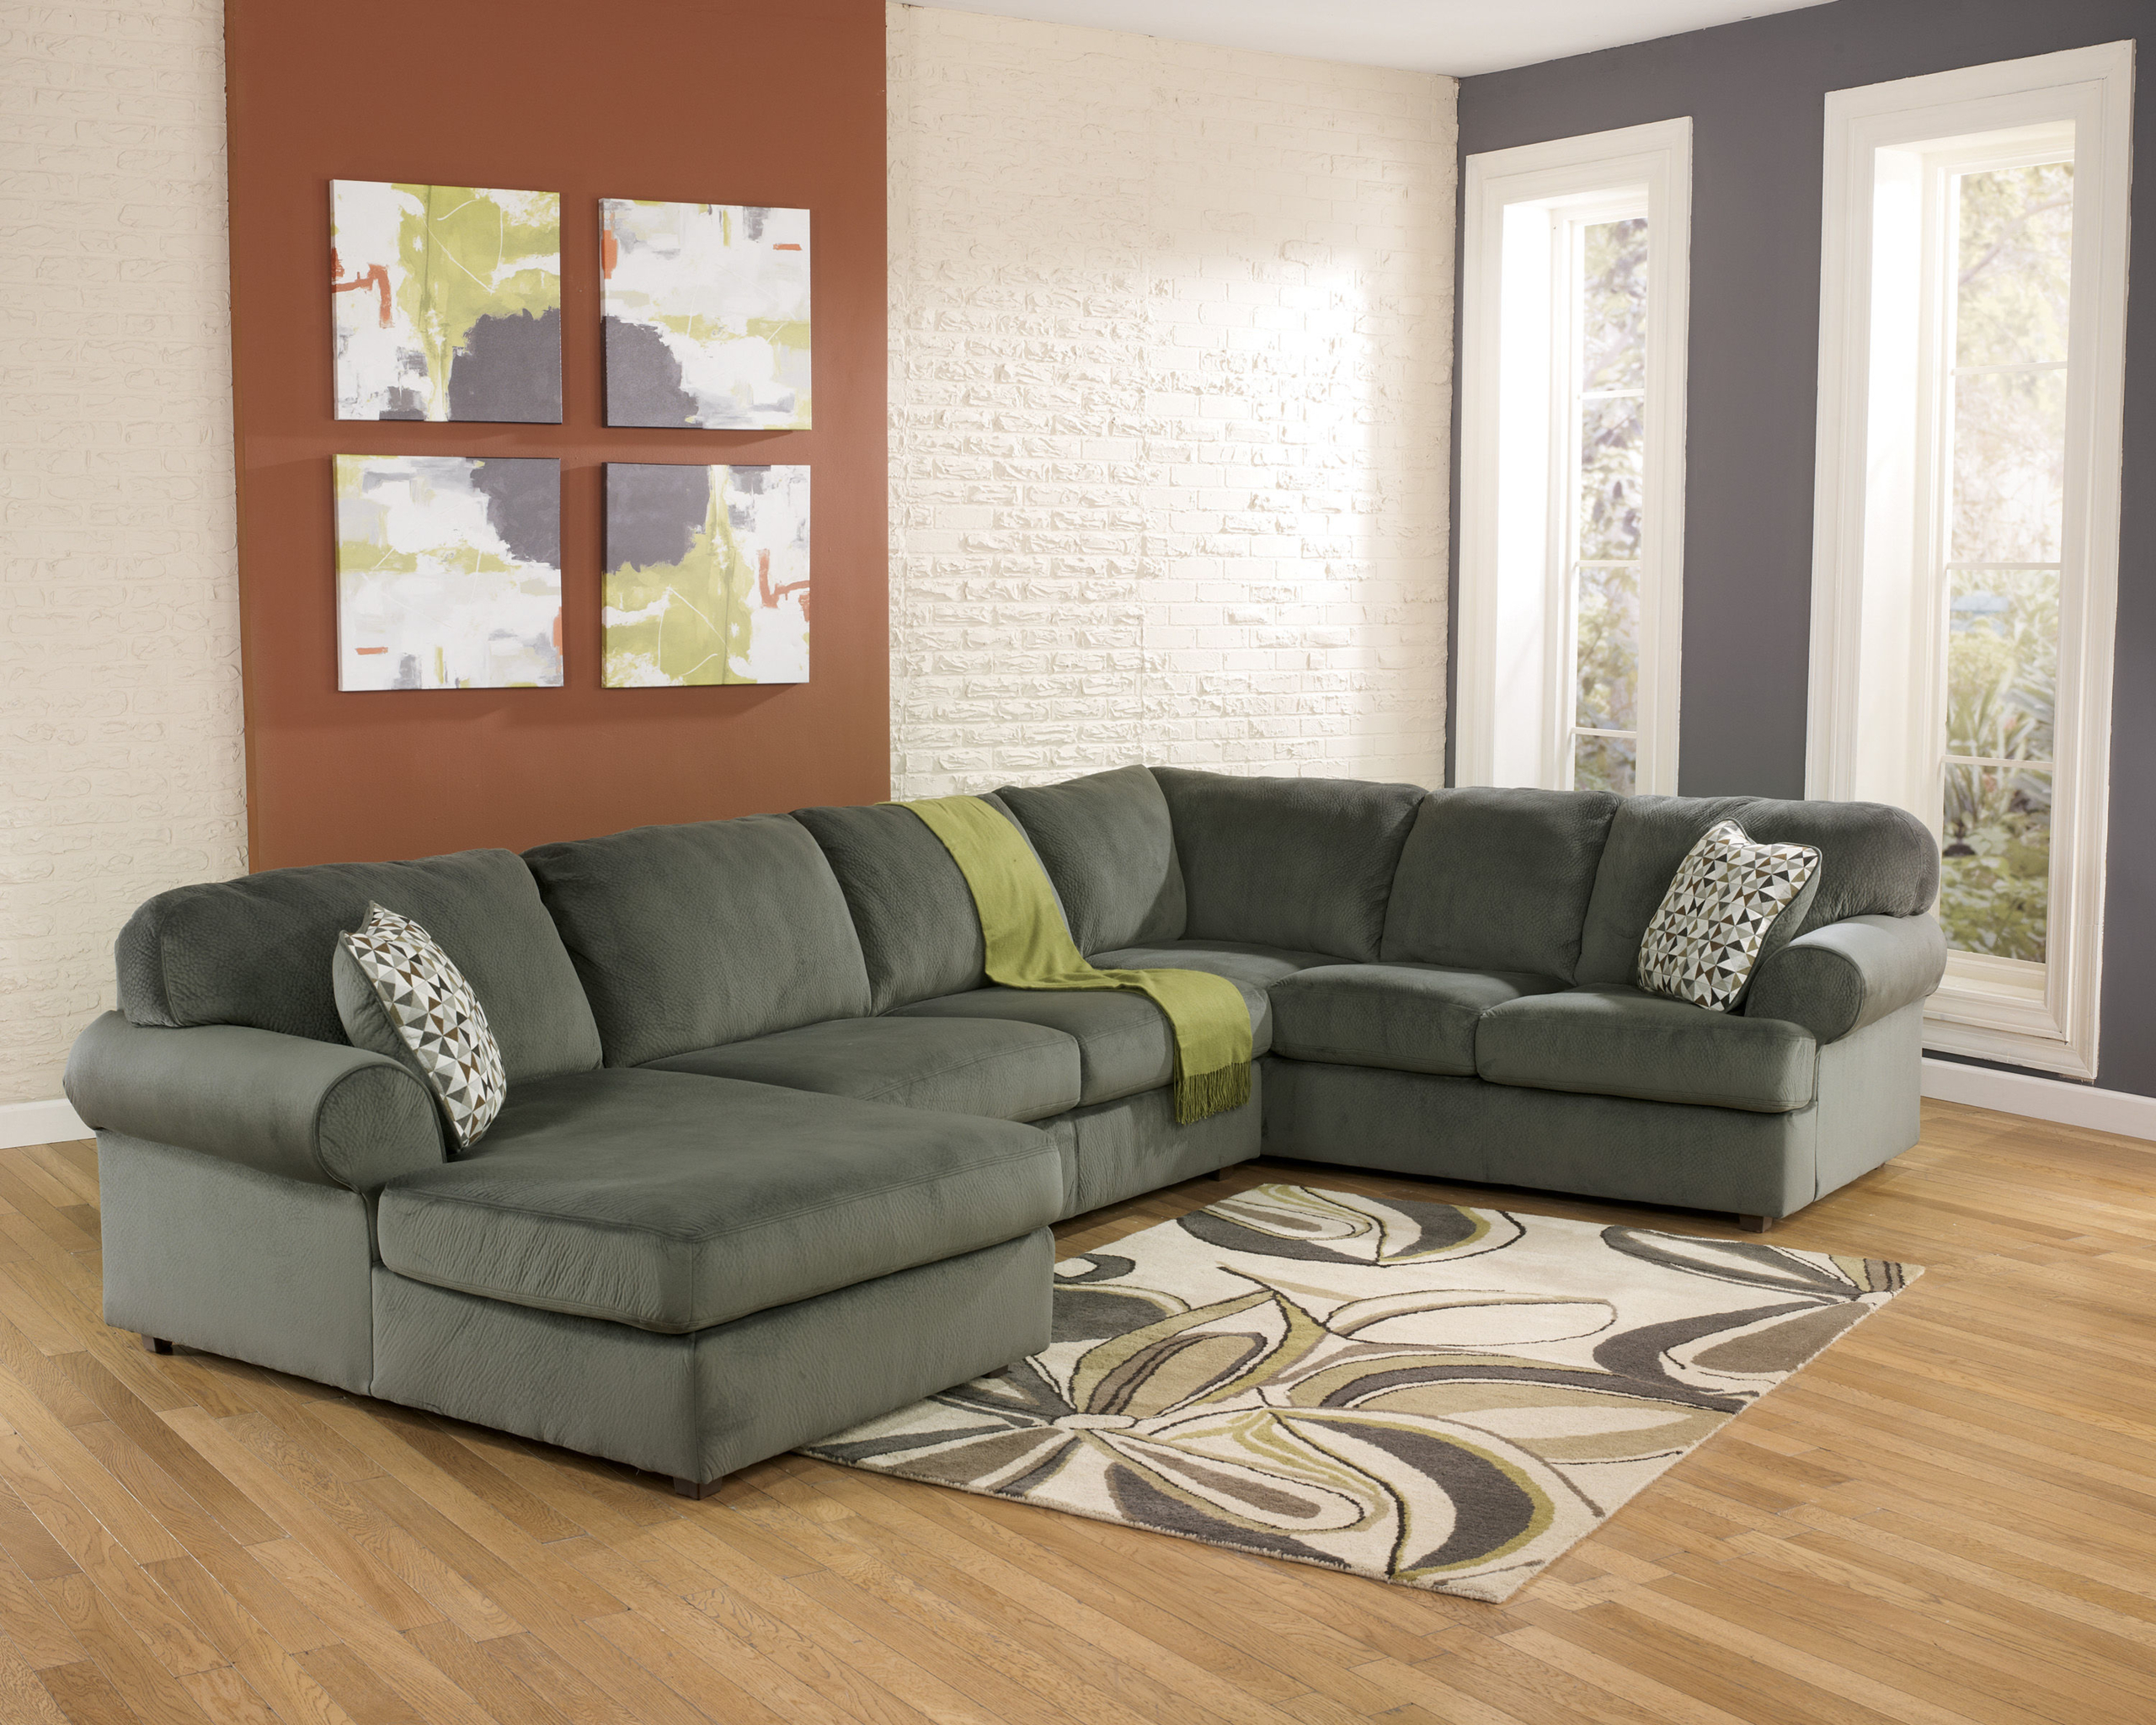 Green sectional couch